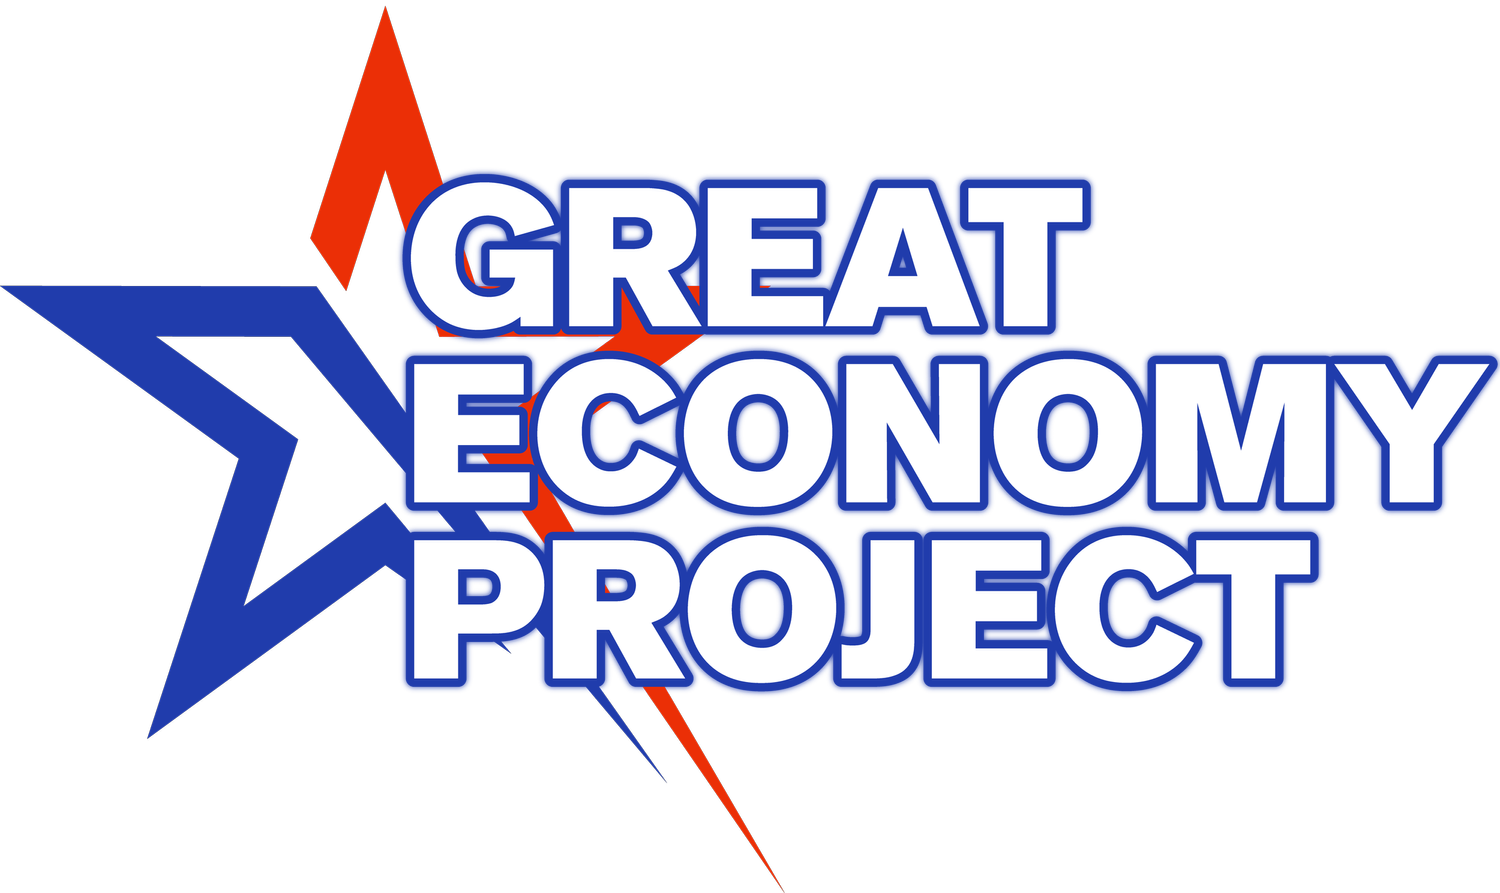 The Great Economy Project